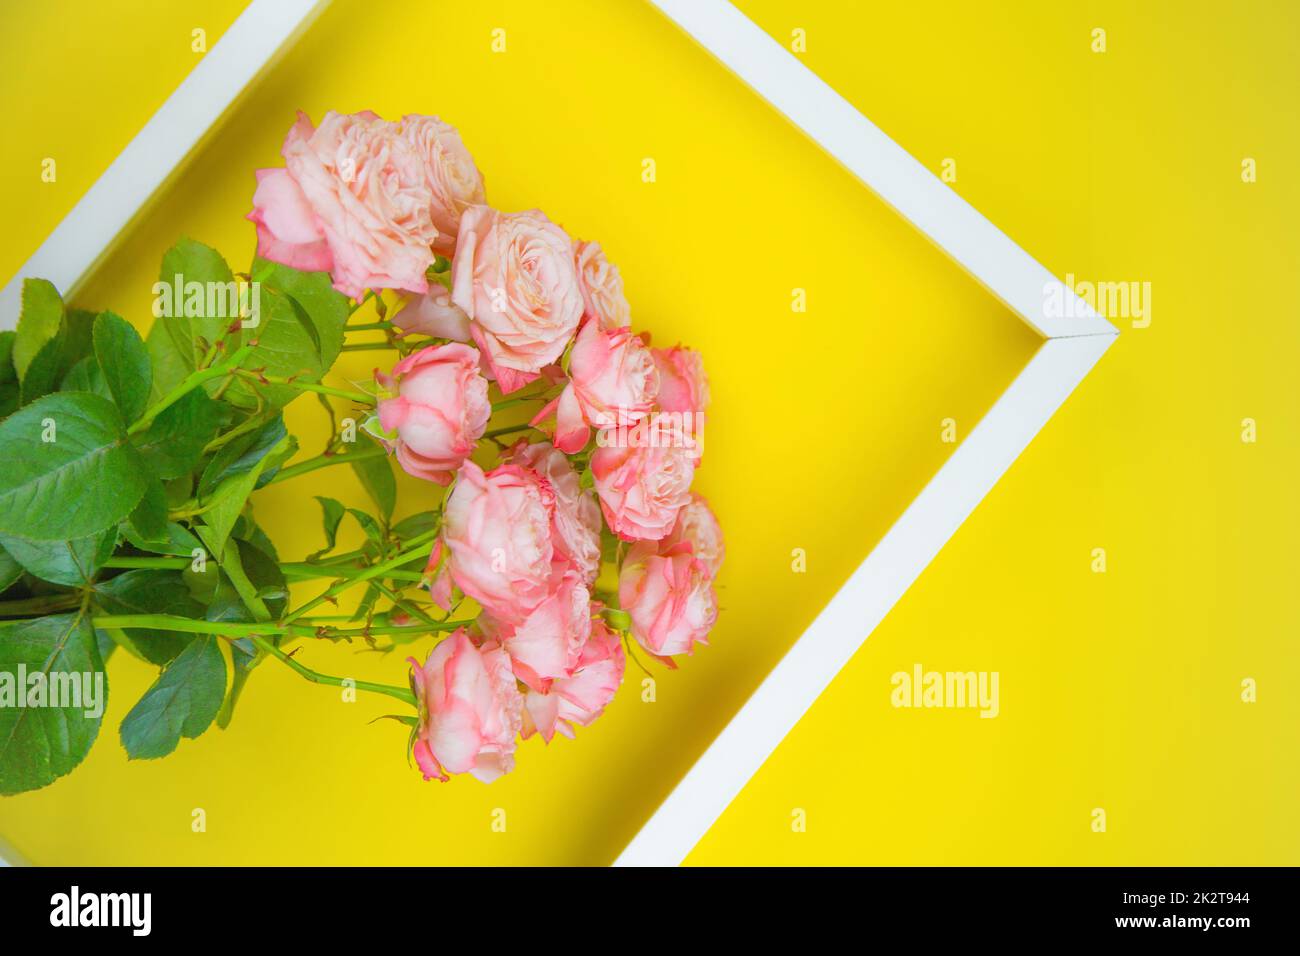 On a bright yellow background there is a white frame and a bouquet of pink roses in it Stock Photo